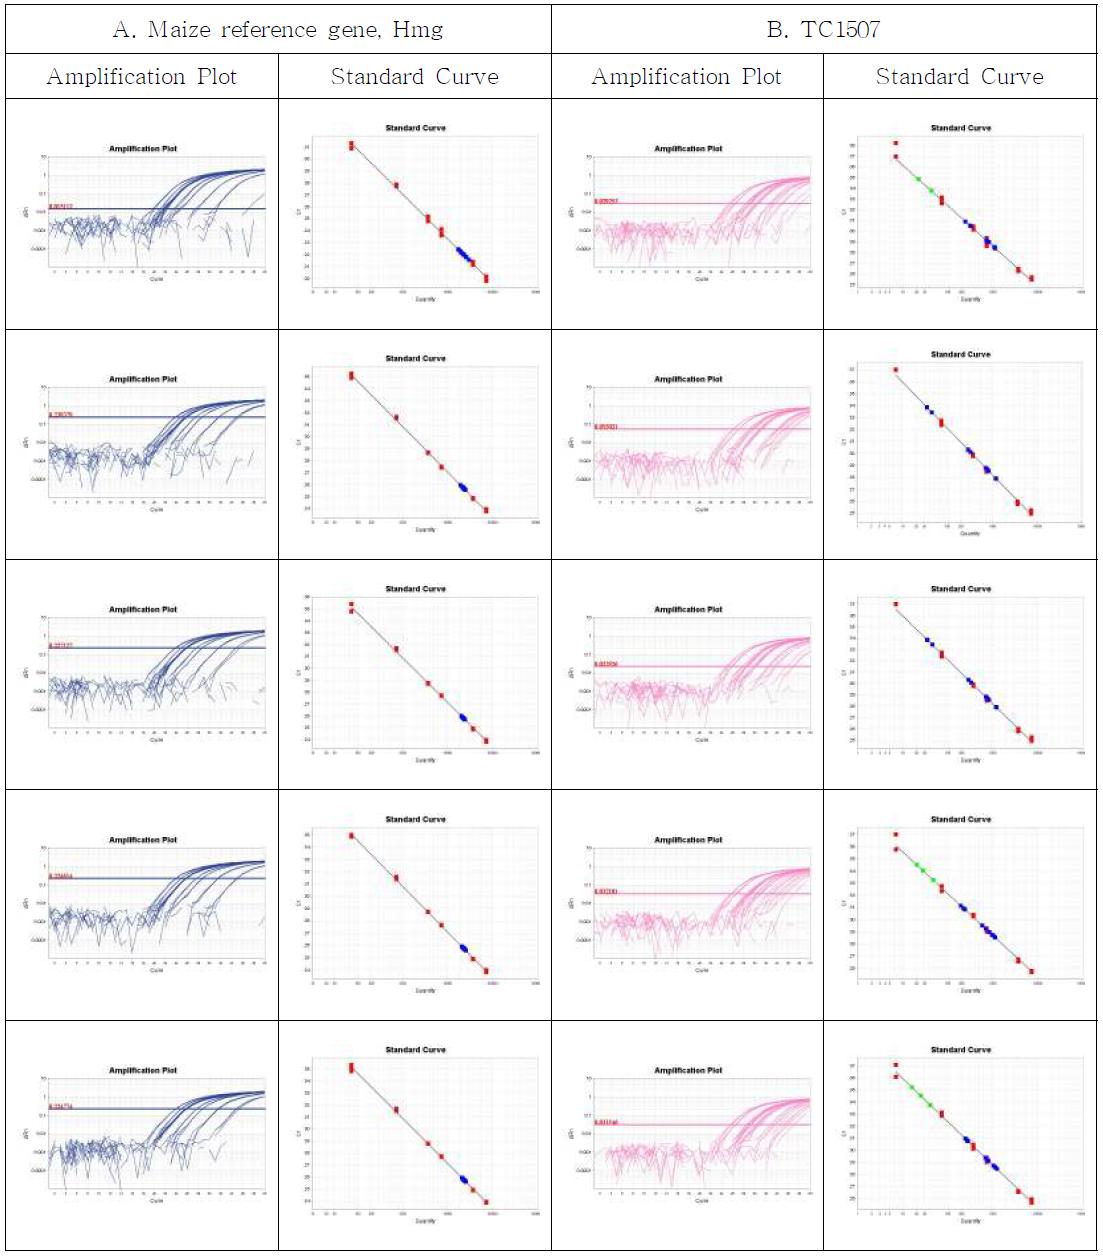 Amplification plots and standard curves for TC1507 event-specific quantitative Real-time PCR method using gradient-diluted TC1507 CRM genomic DNA as the template, performed by Lab. 2. A. Amplification graph and standard curves for the maize reference gene, Hmg assay. B. Amplification graph and standard curves for the TC1507-event specific assay.